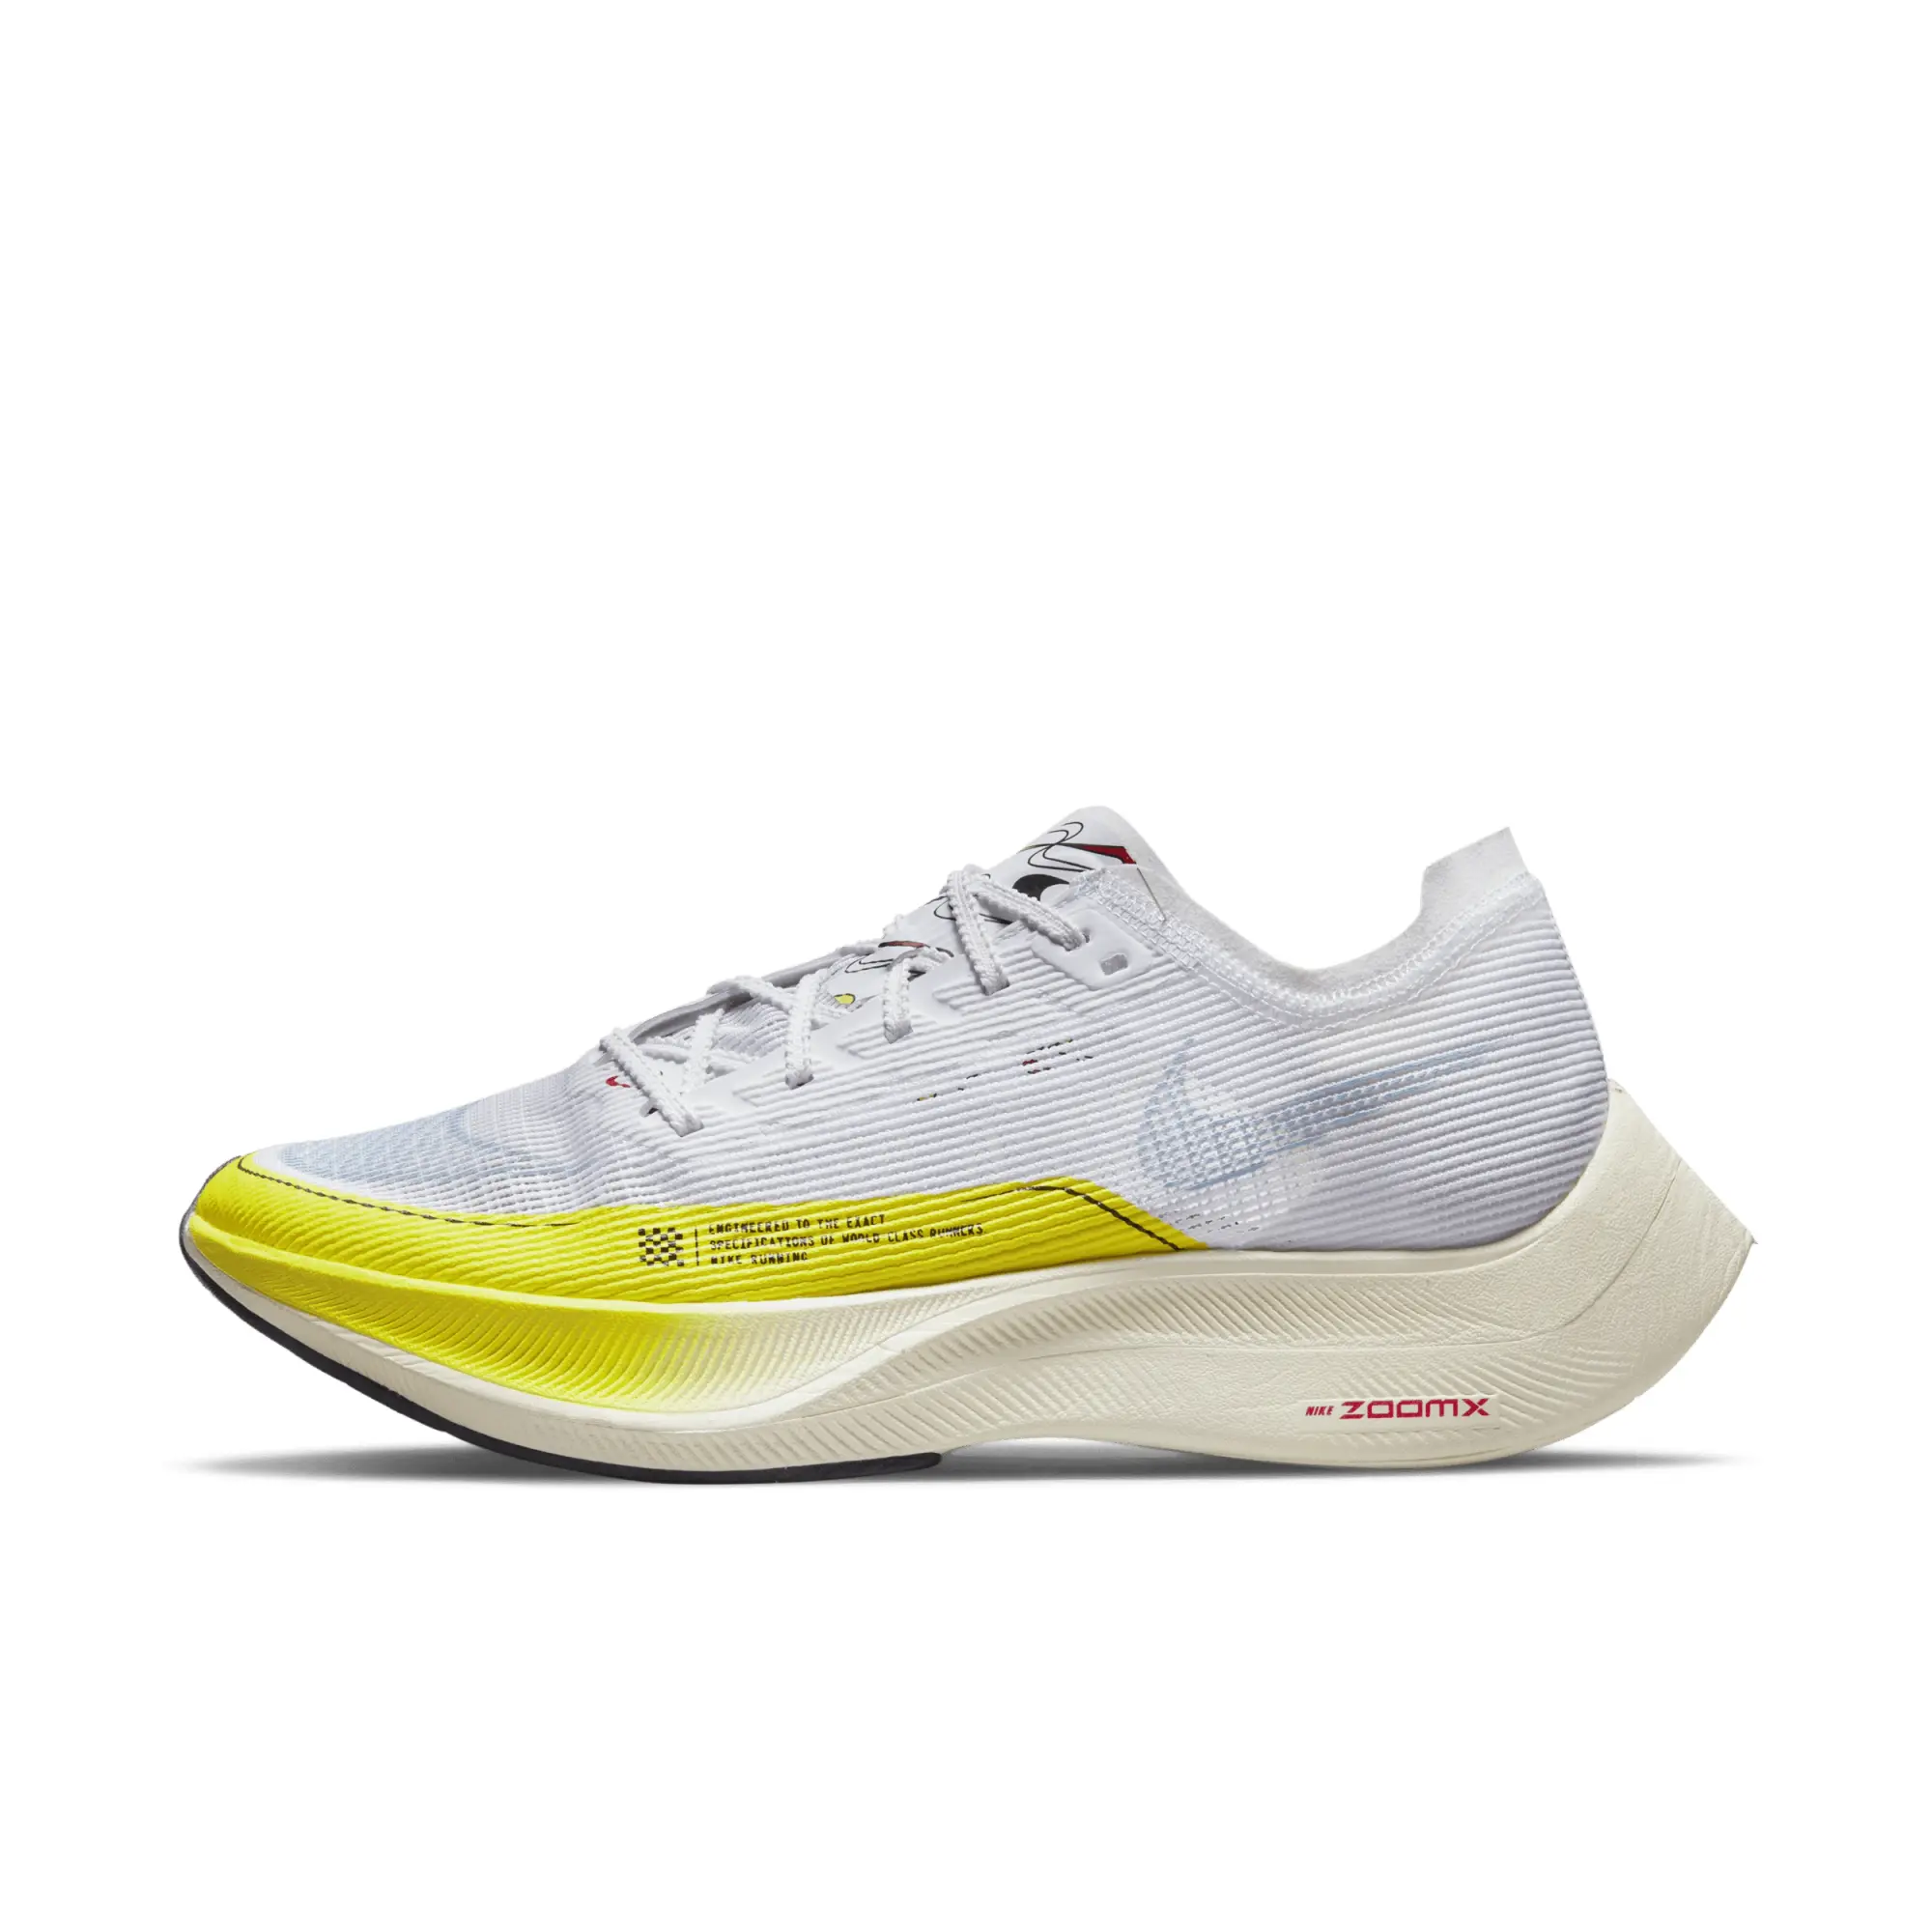 Nike Womens Zoomx Vaporfly Next%2 Shoes